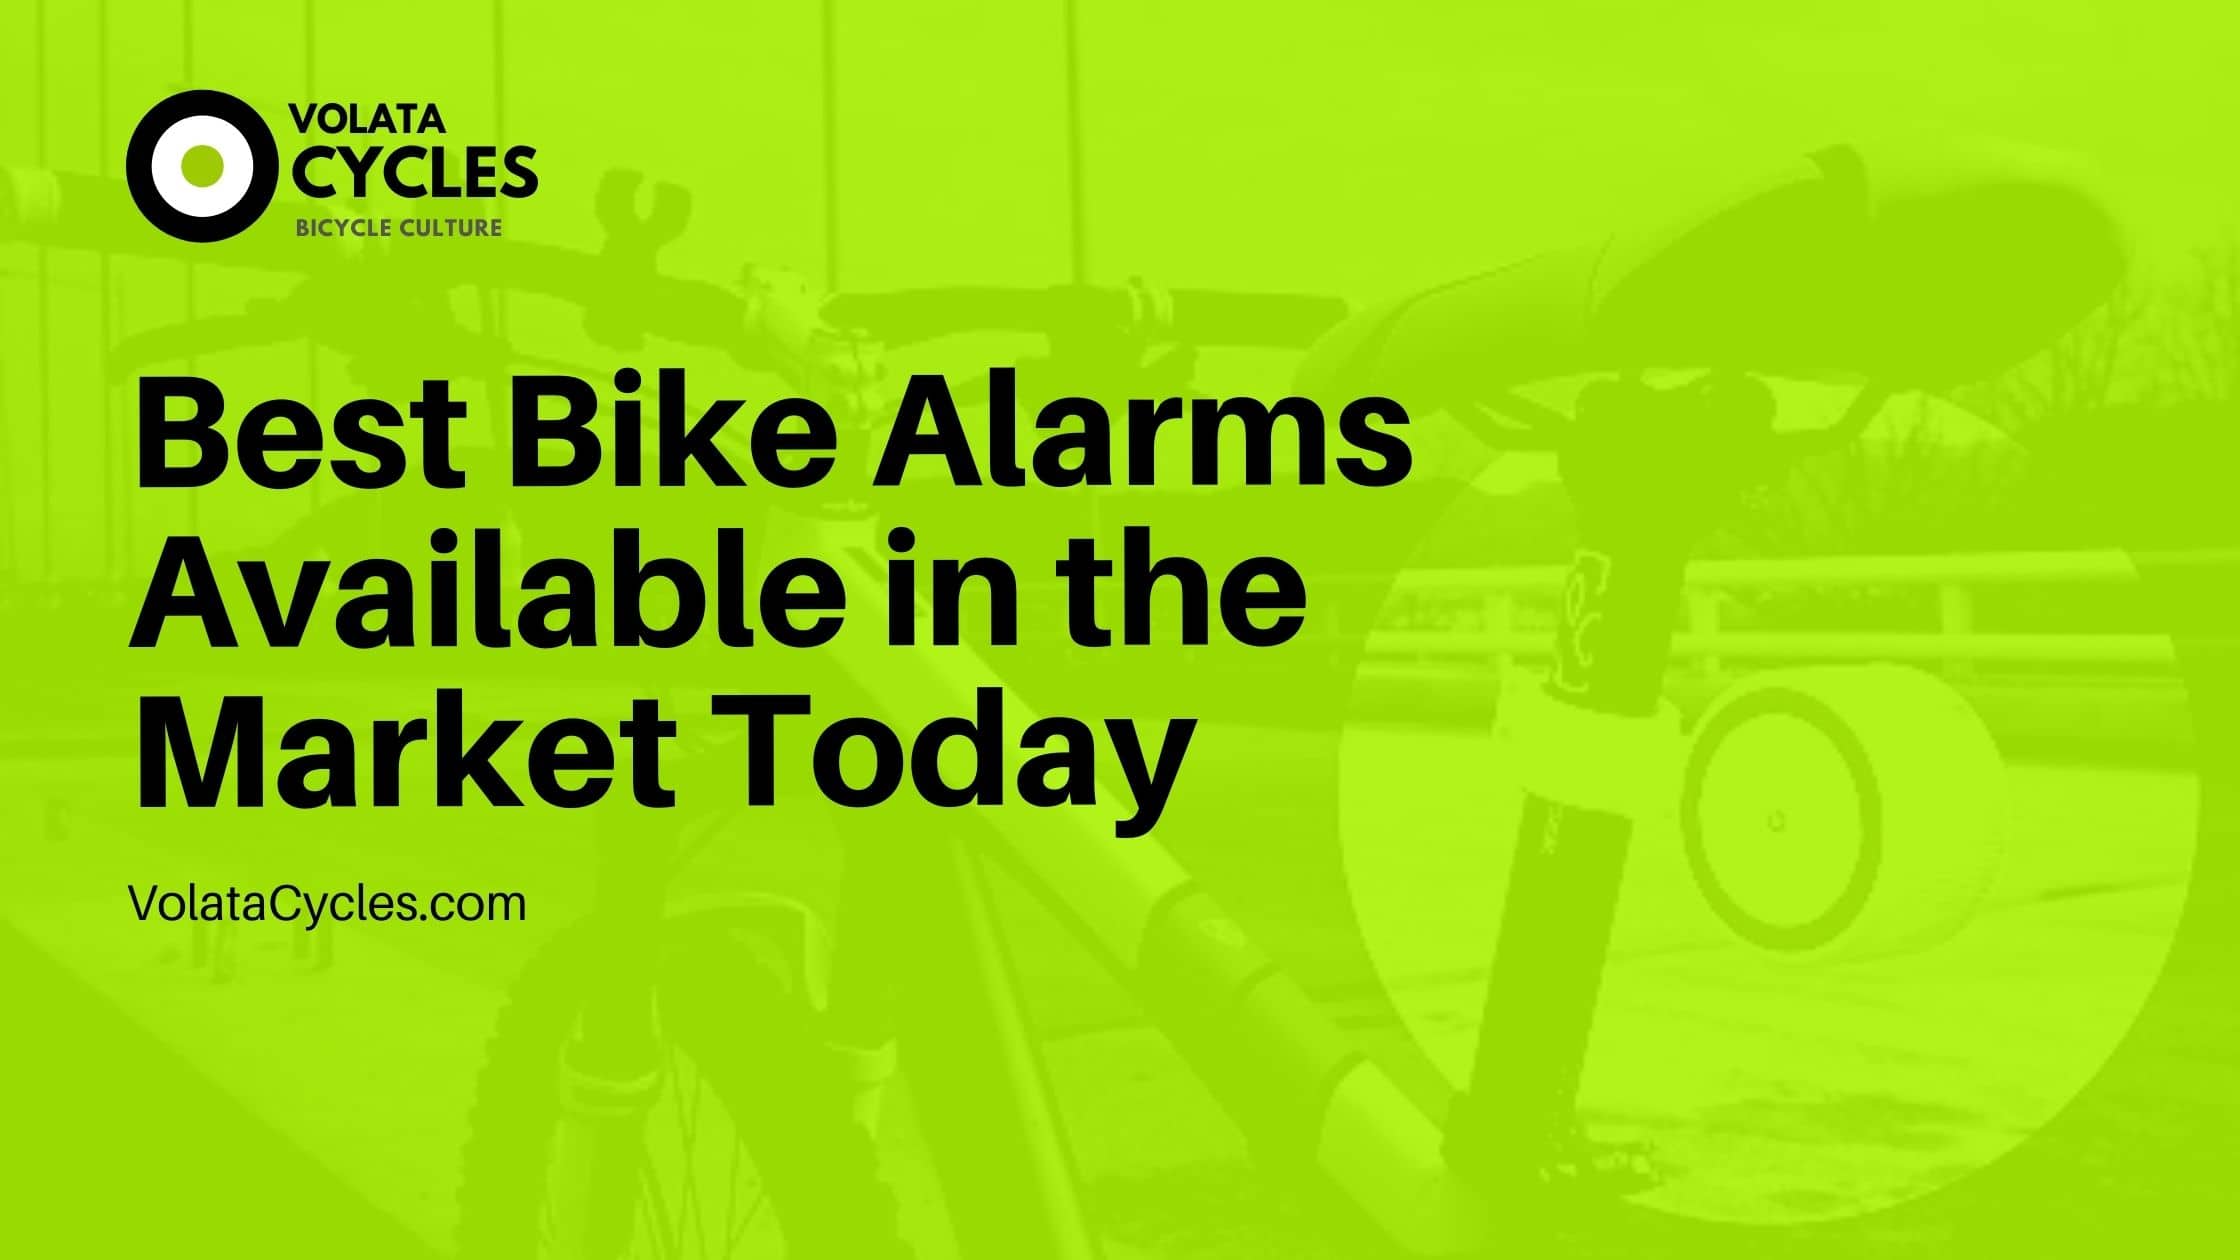 Best-Bike-Alarms-Available-in-the-Market-Today